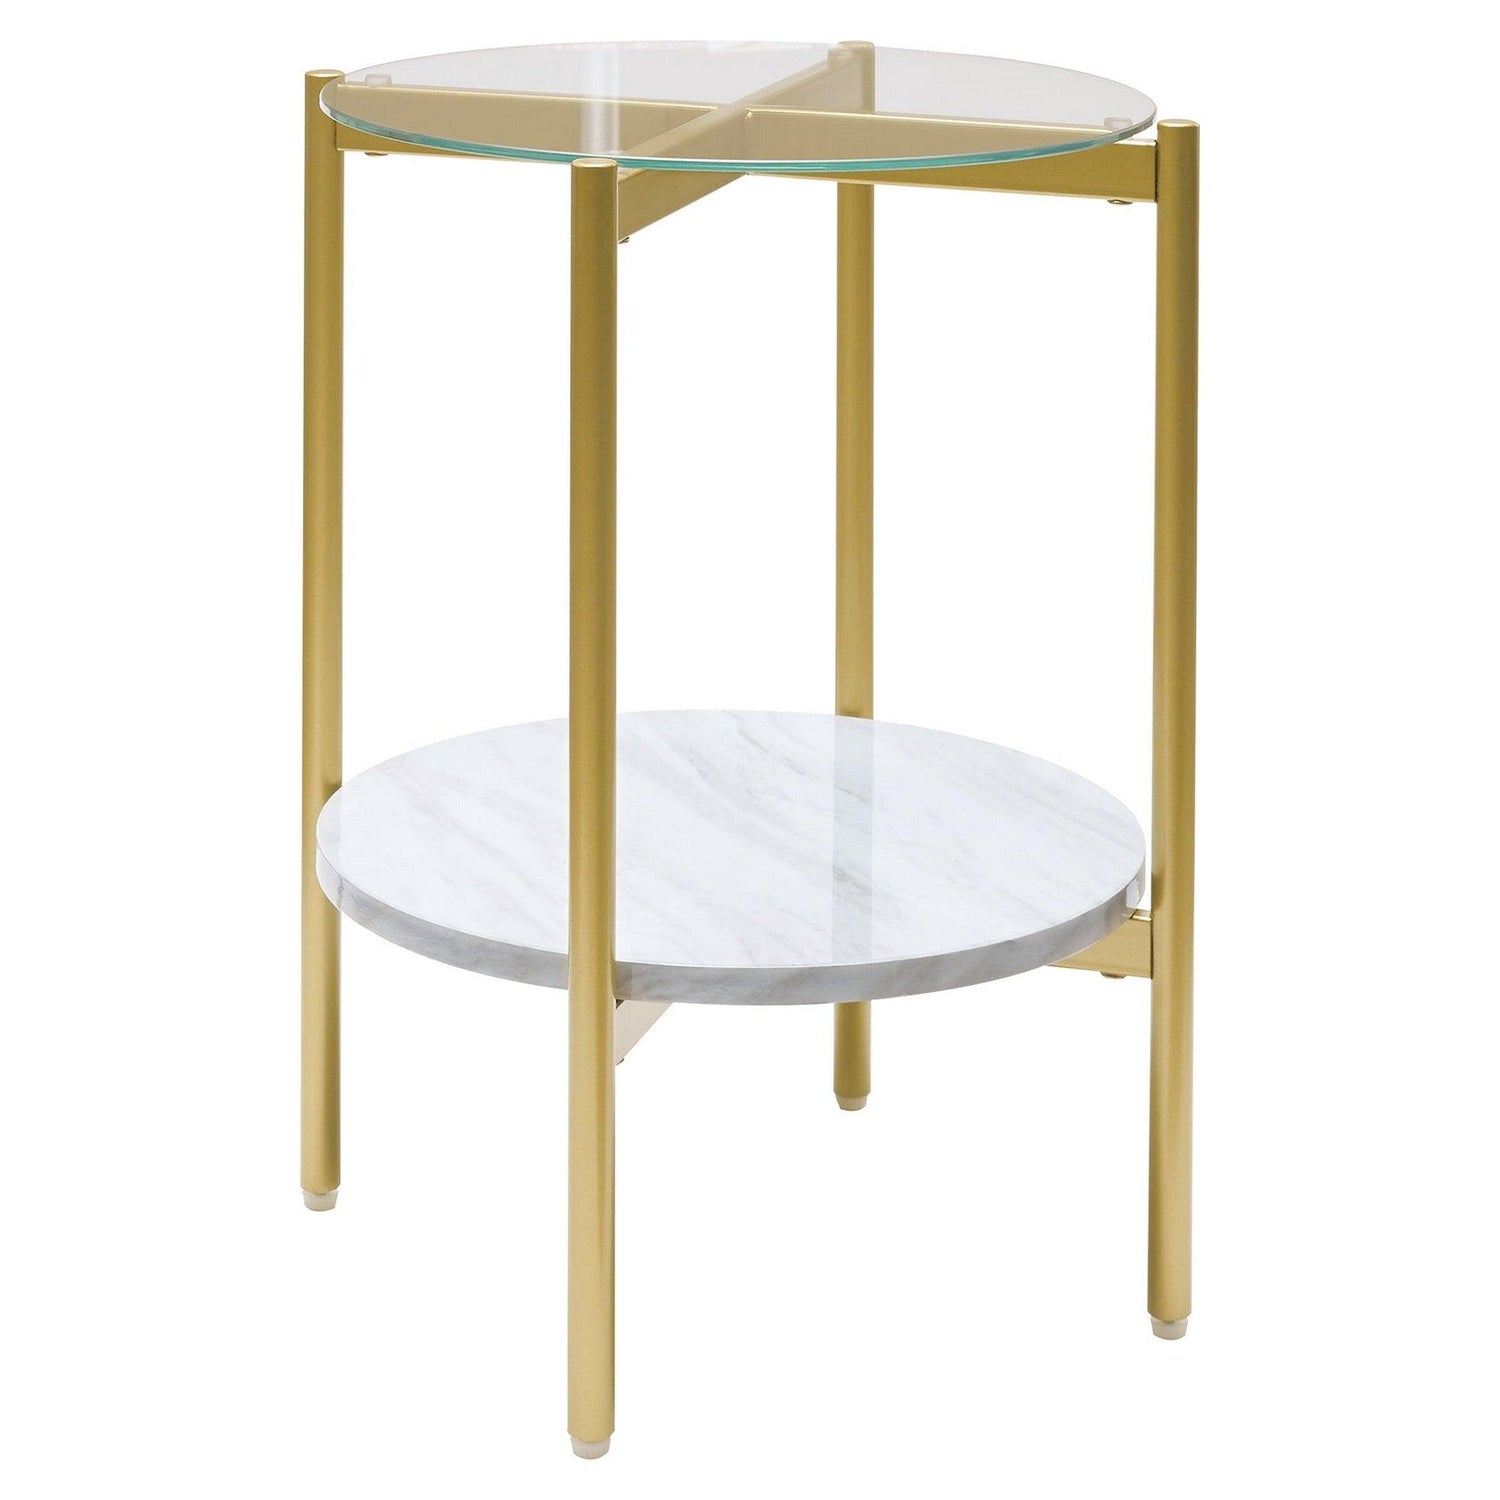 Wynora End Table Ash-T192-6